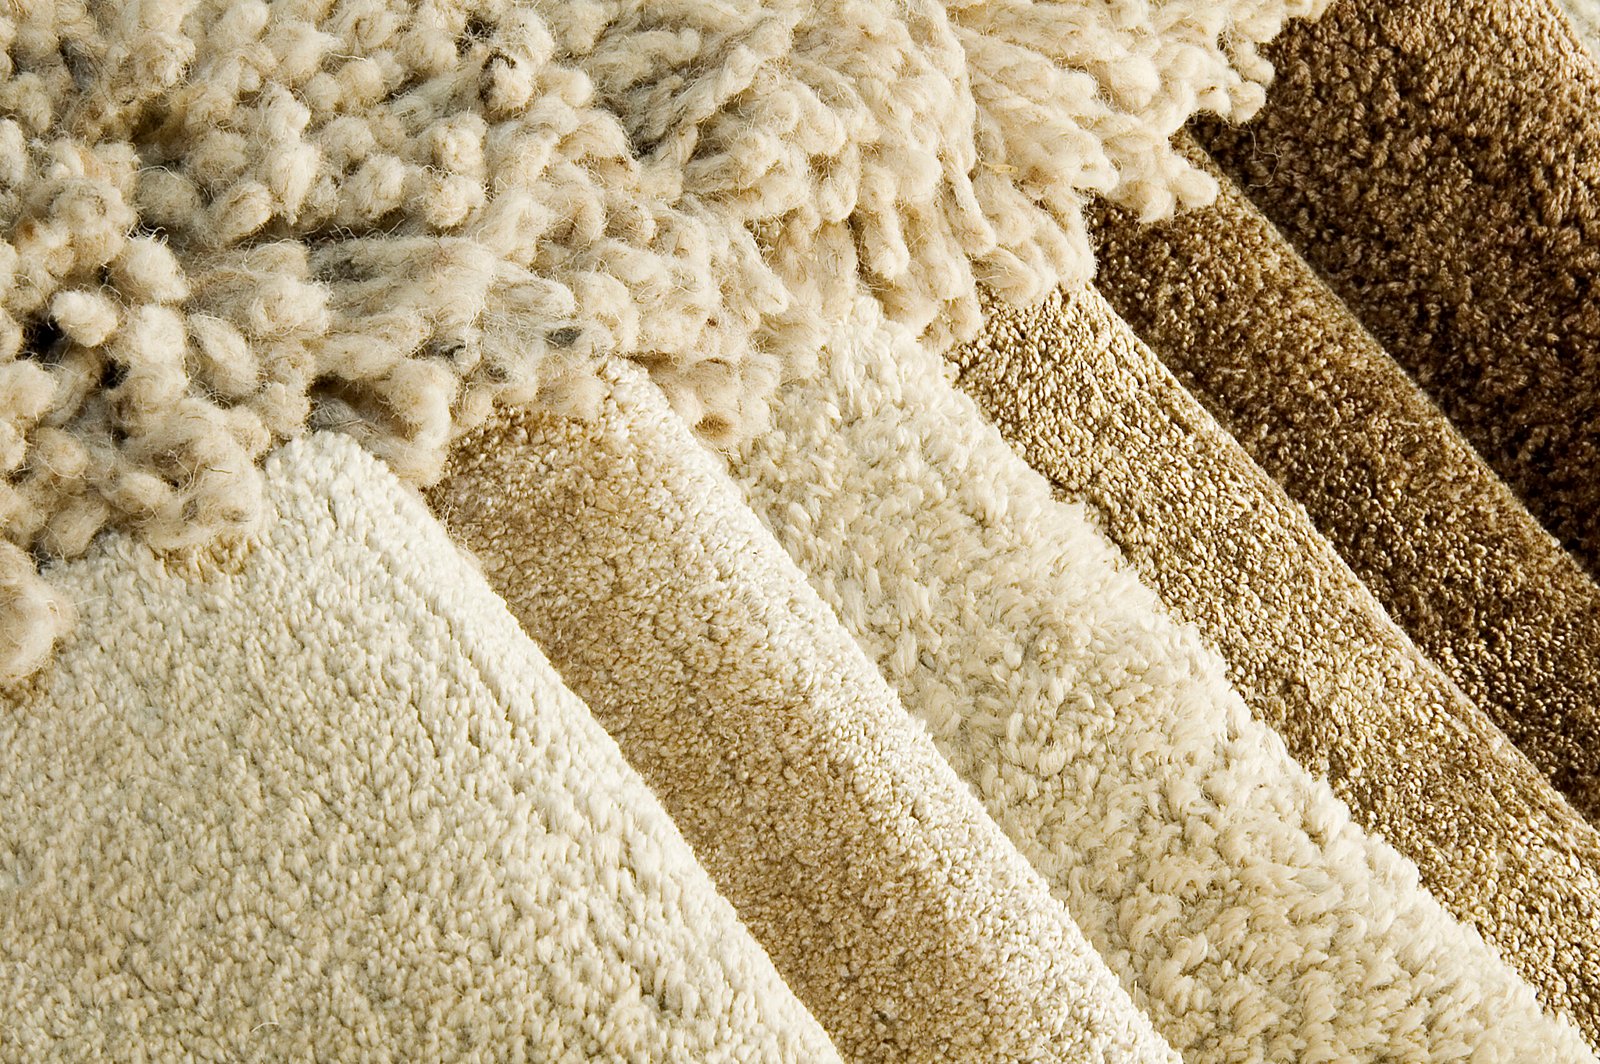 Lush carpet samples for your home